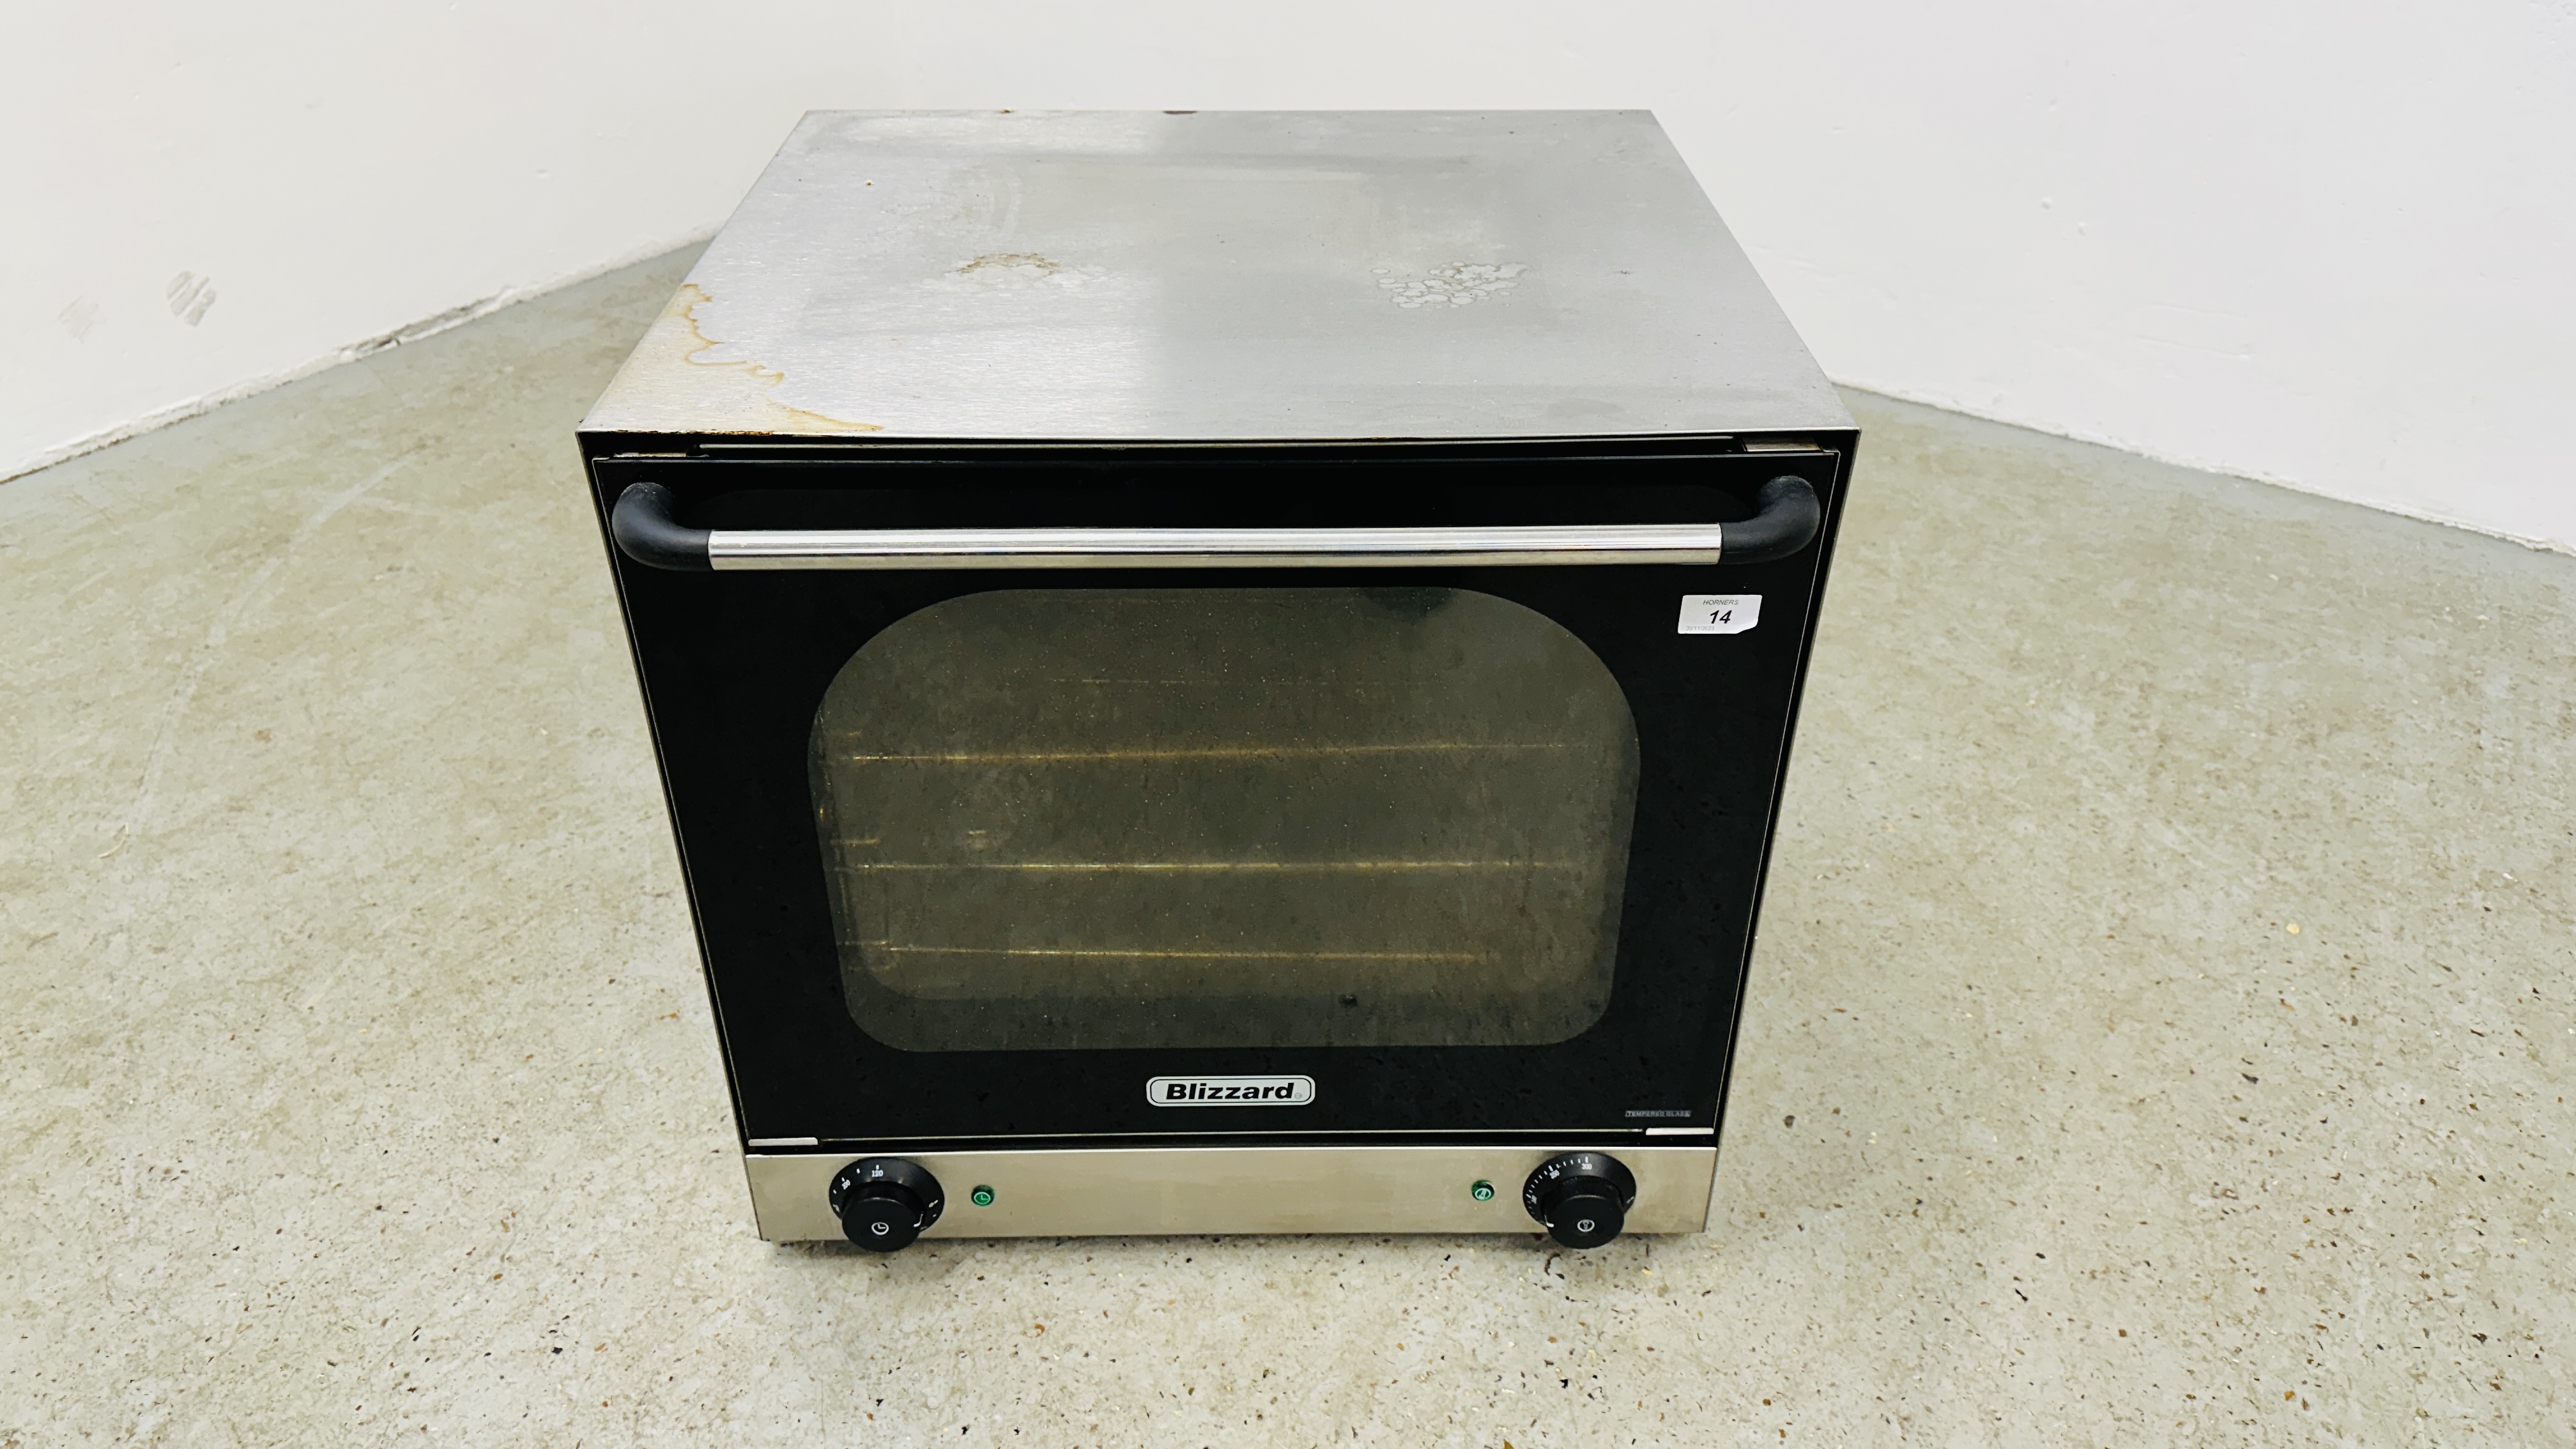 BLIZZARD MEDIUM DUTY 60 LITRE ELECTRIC MANUAL COUNTER TOP CONVECTION OVEN MODEL - BC 01 - SOLD AS - Image 2 of 7